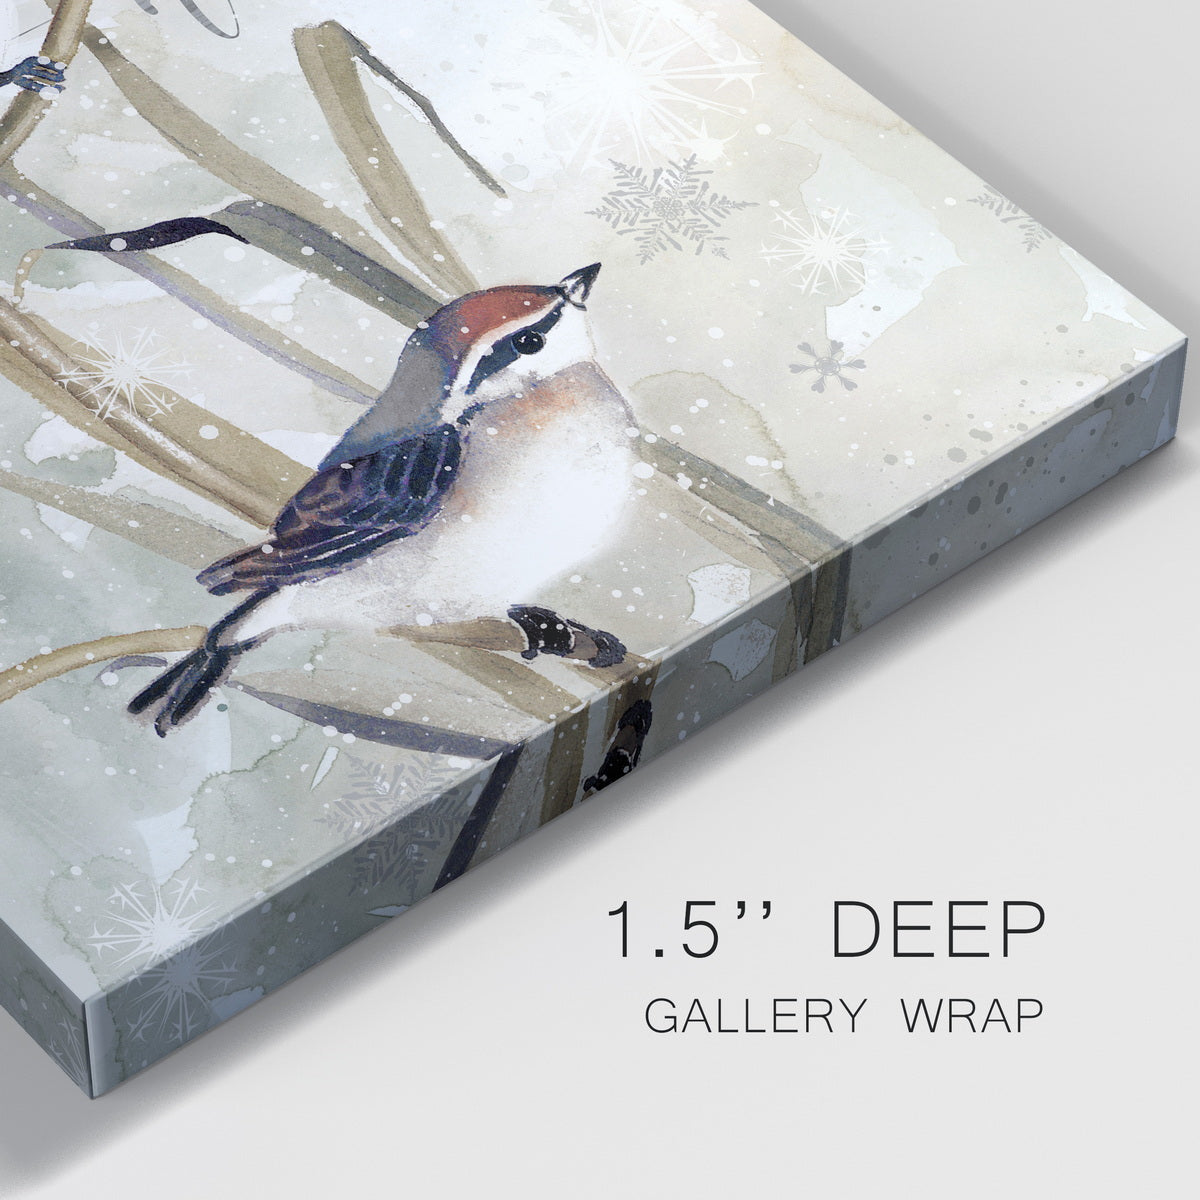 Winter Birds Noel-Premium Gallery Wrapped Canvas - Ready to Hang